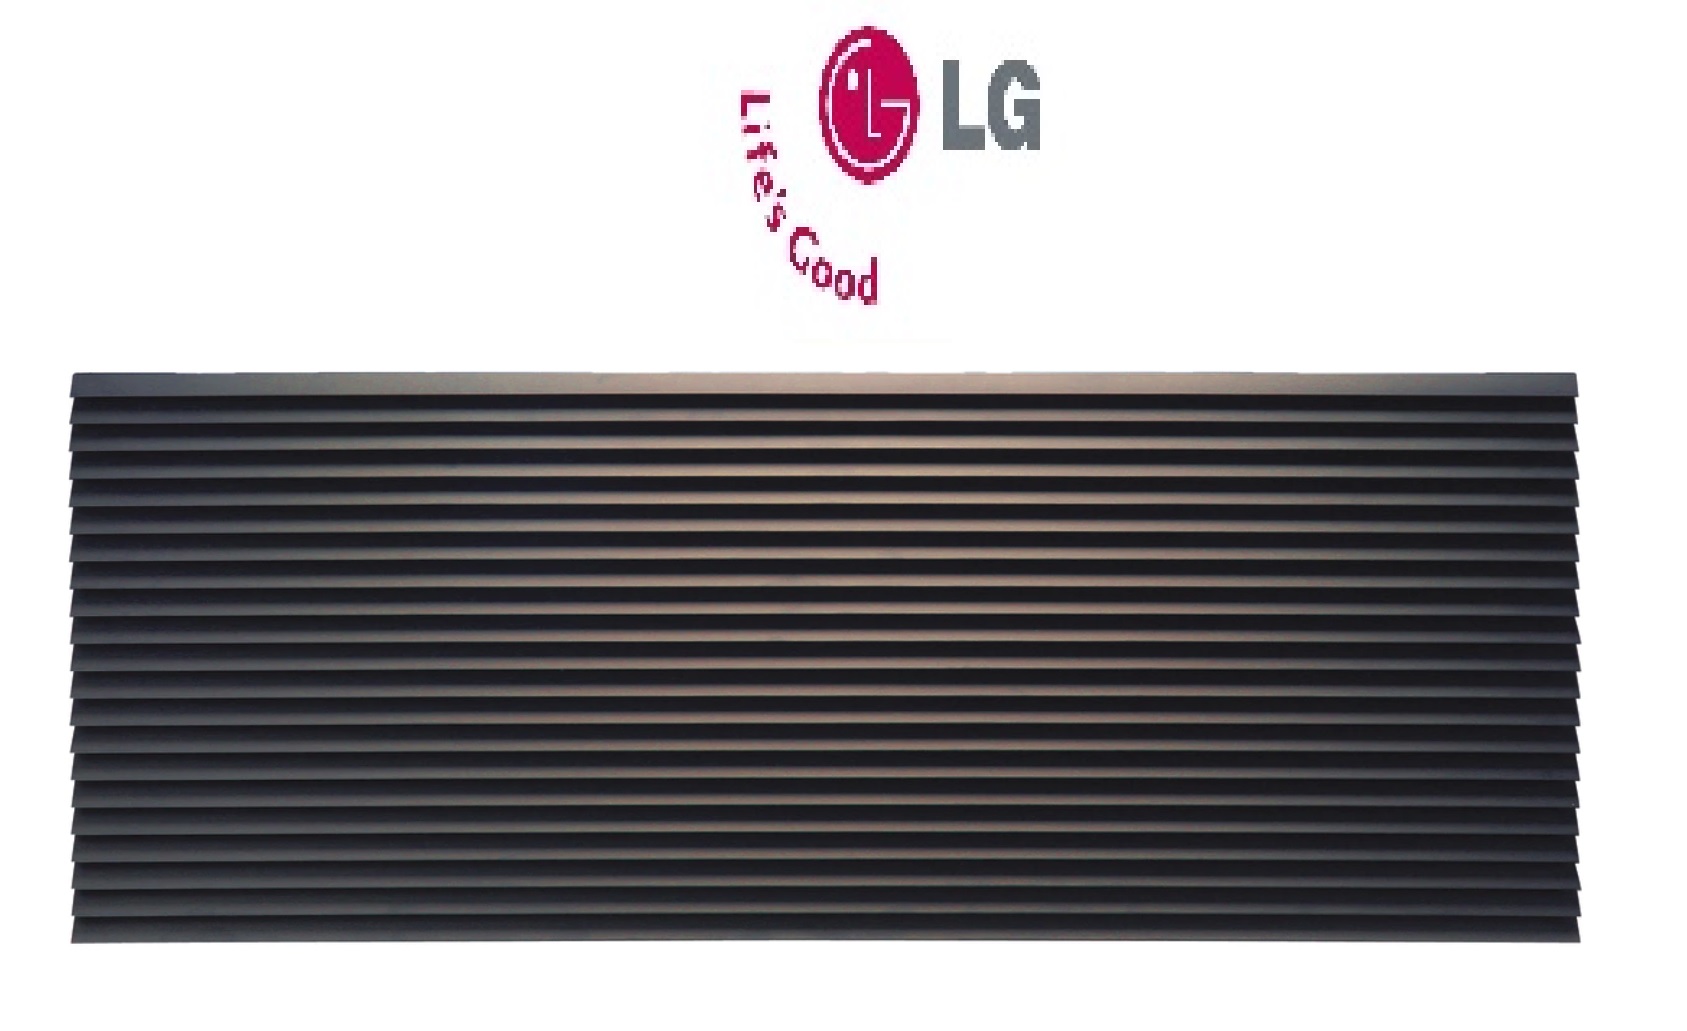 LG AYAGALB01A Architectural Outdoor Grille - Dark Bronze